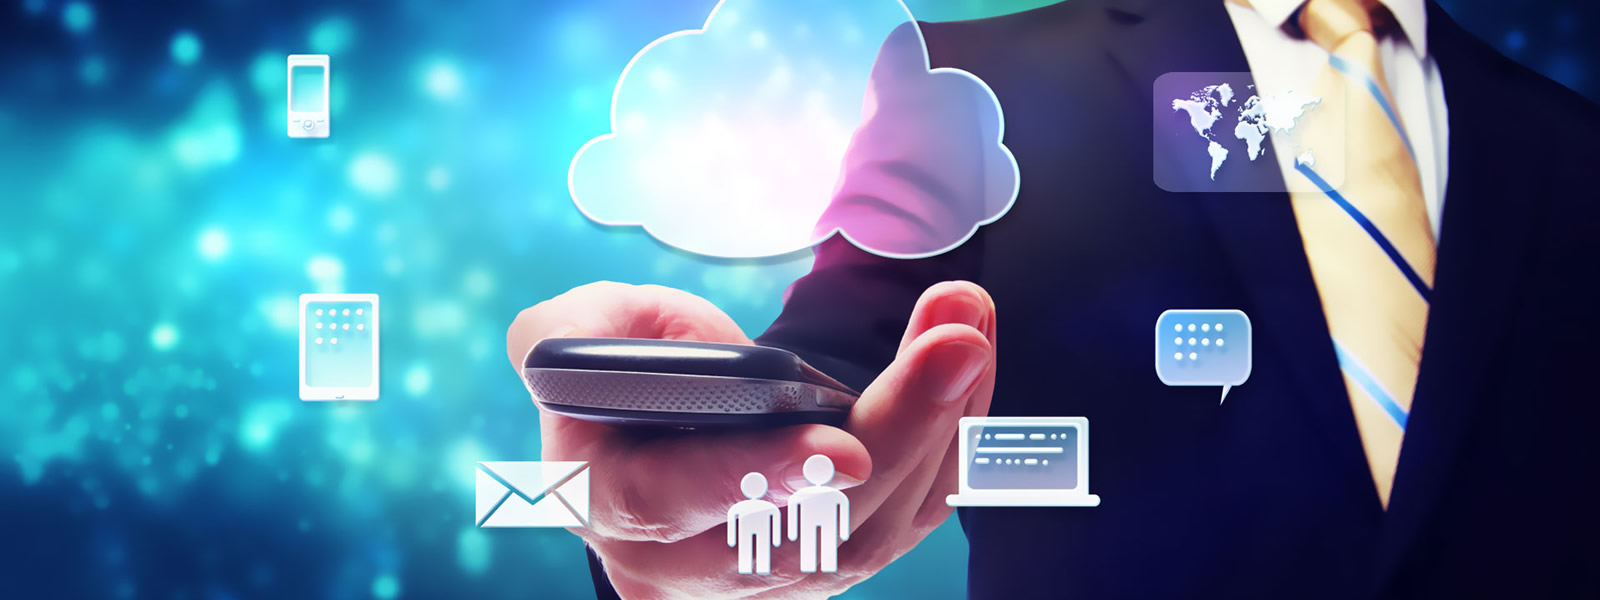 Extend your organization’s Communications enable a BYOD solution by using your famous sip client app, or save money using our hosted voice service – vPBX puts business-class communications tools in your pocket so no matter where you are in the world, you stay connected.